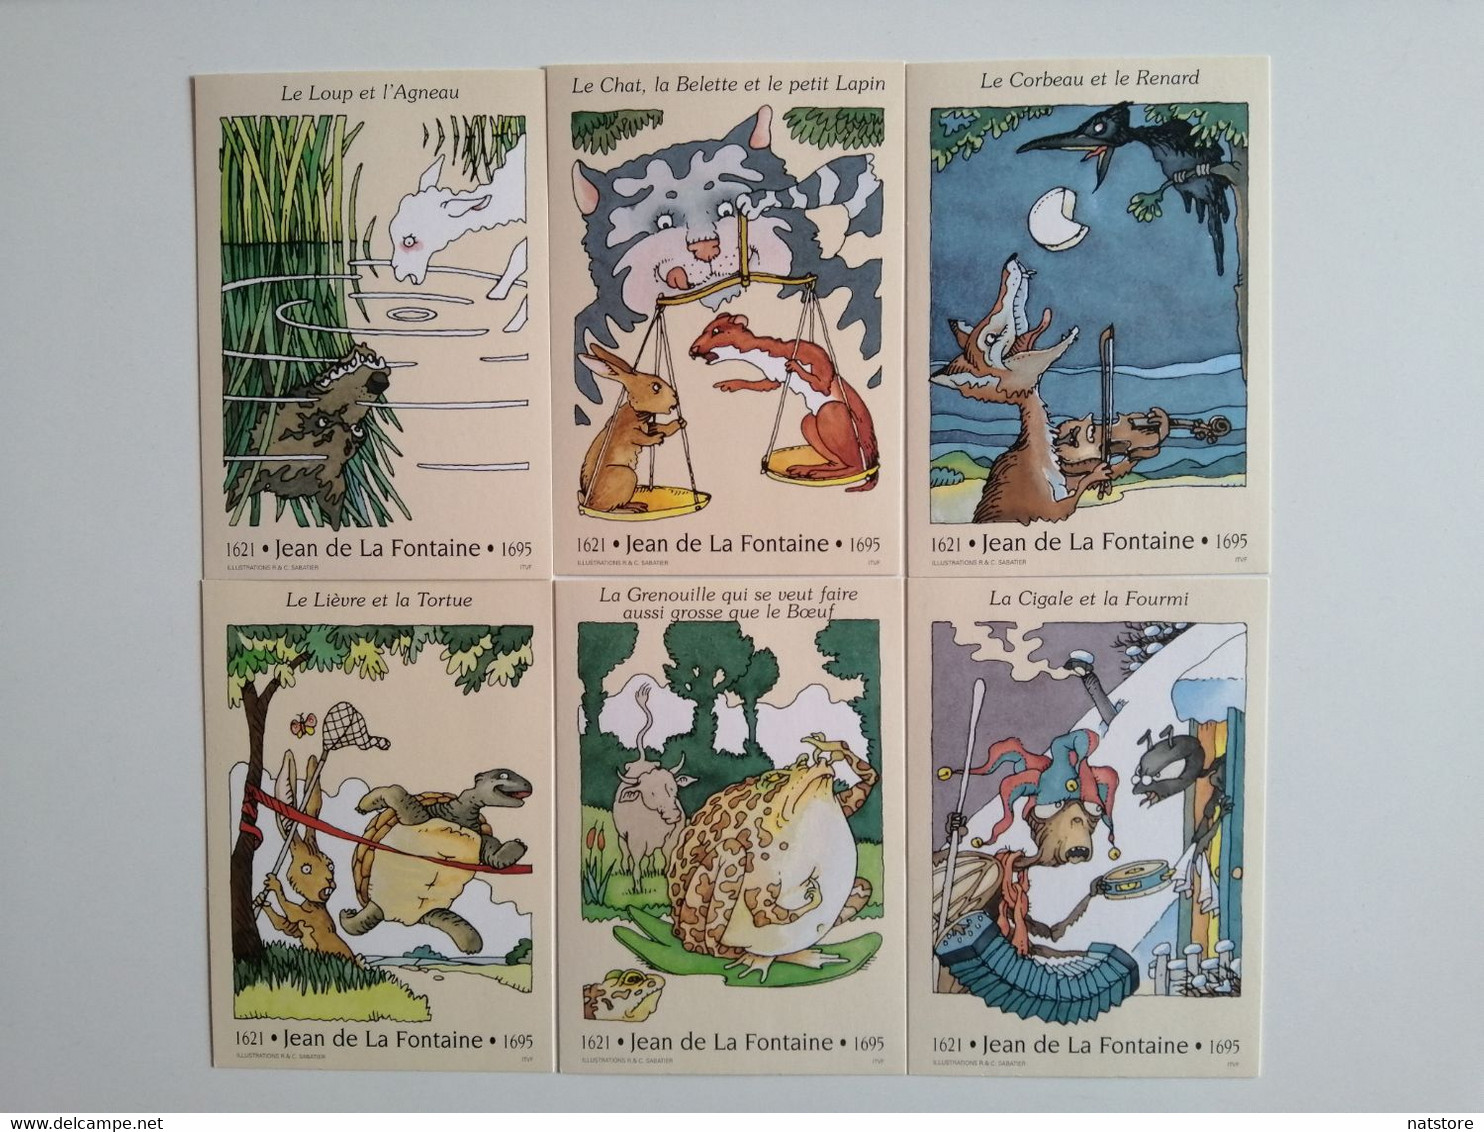 1995.. FRANCE ..LOT OF 6 POSTAL CARDS WITH PRINTED STAMPS..''THE FABLES OF JEAN DE LA FONTAINE''..NEW..FULL SERIE - Lots Et Collections : Entiers Et PAP